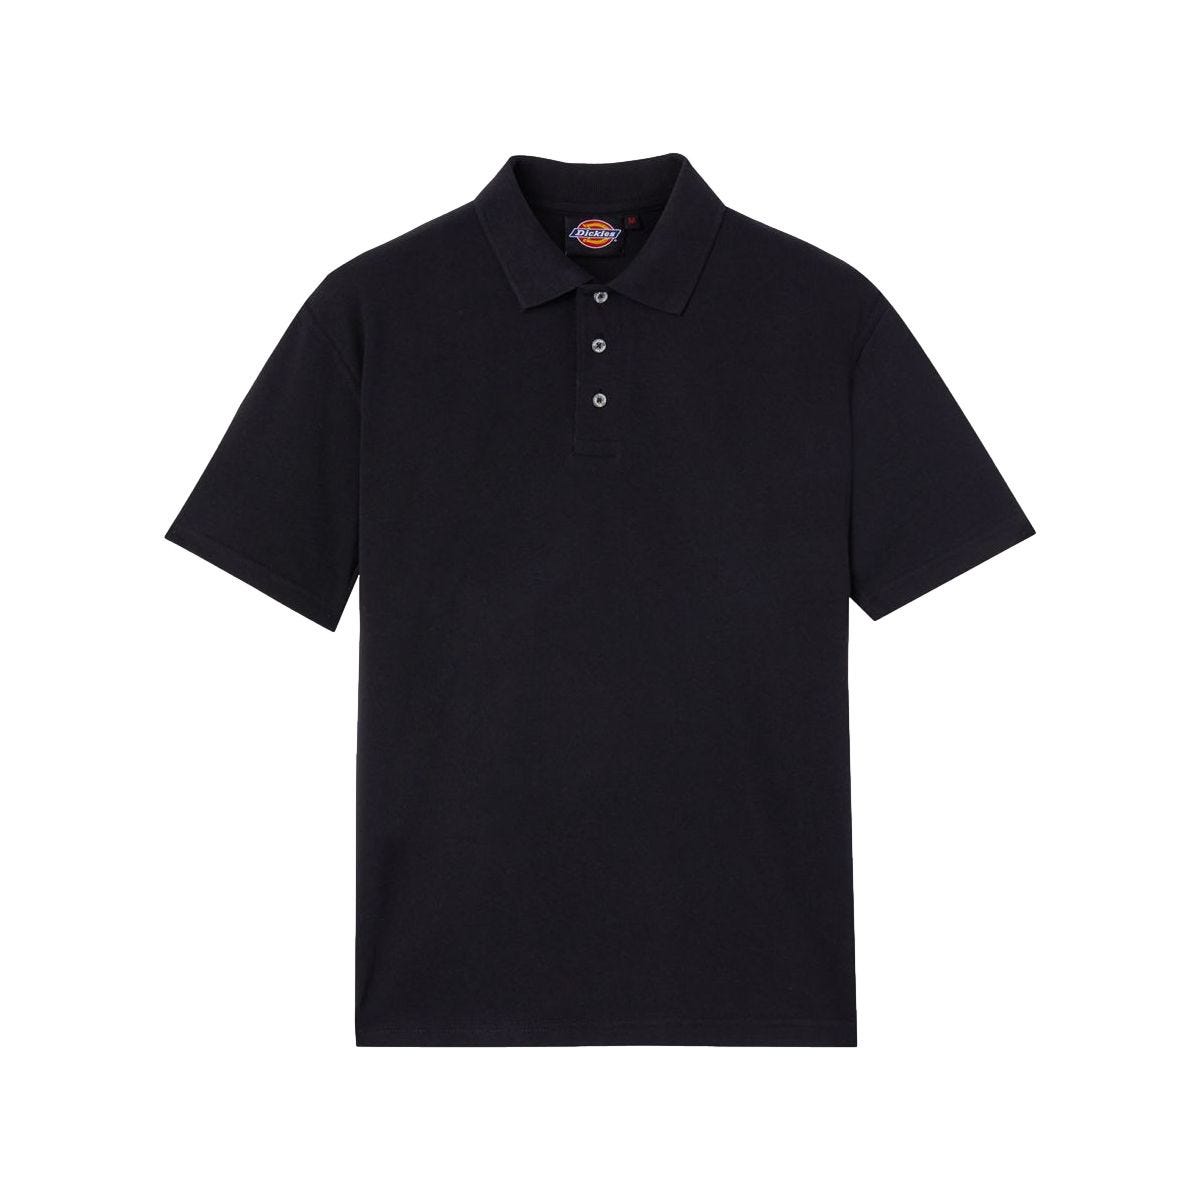 Polo Noir - Dickies - Taille S 0